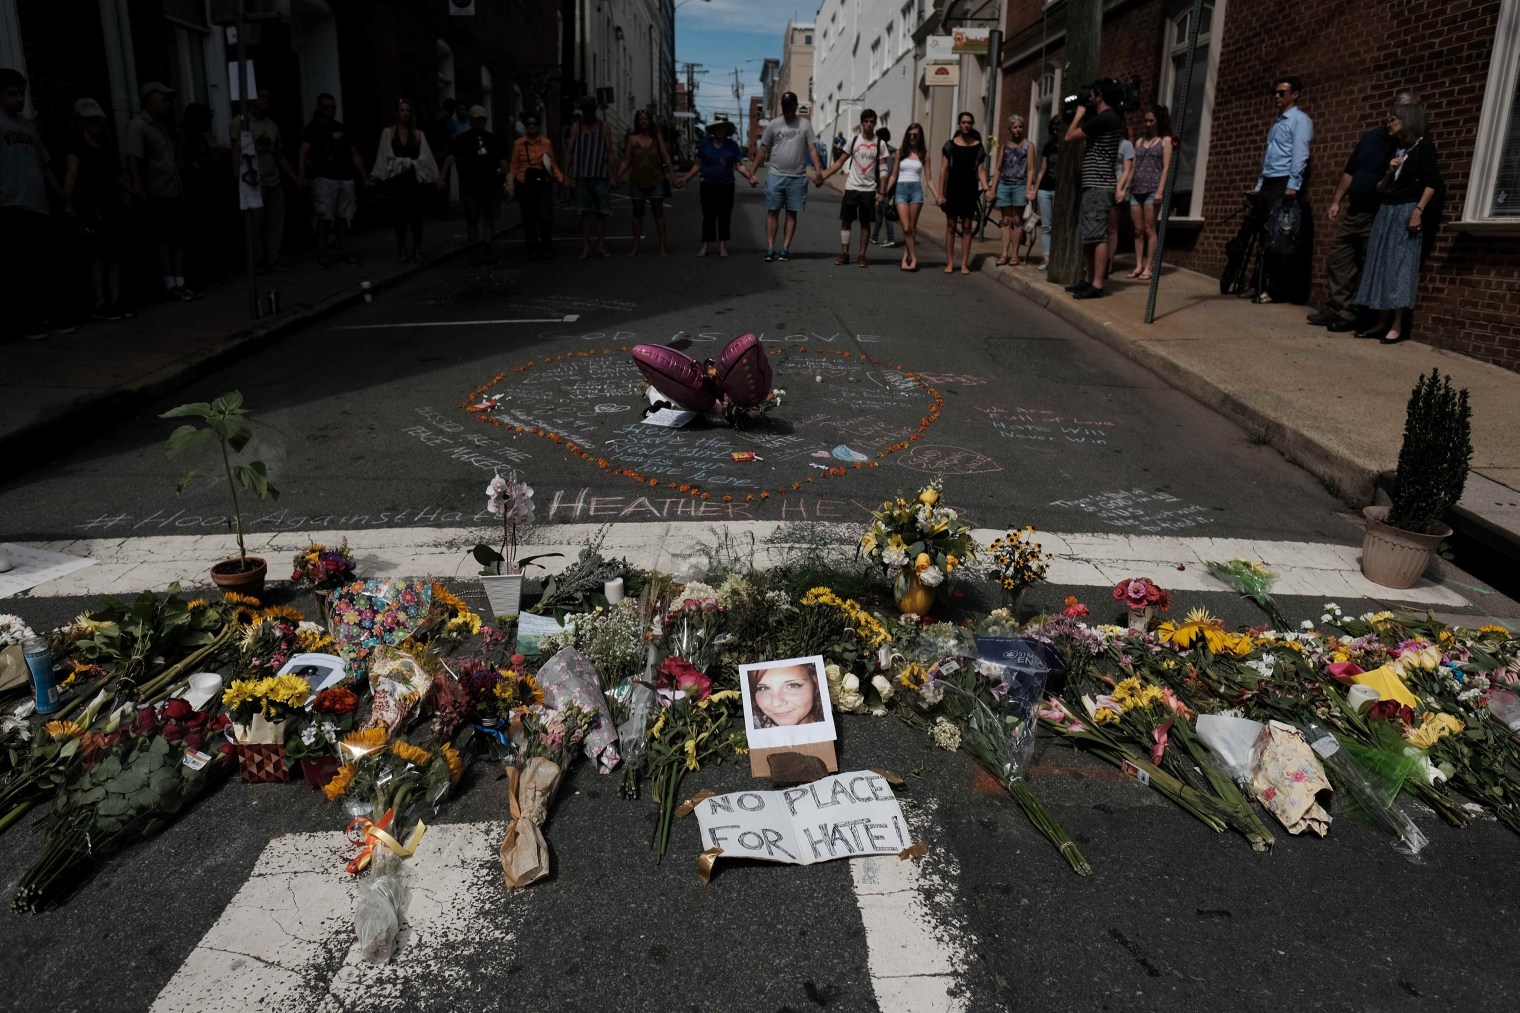 Flowers and a photo of car-ramming victim Heather Heyer lie at a makeshift memorial in Charlottesville, Va., on Aug. 13, 2017.